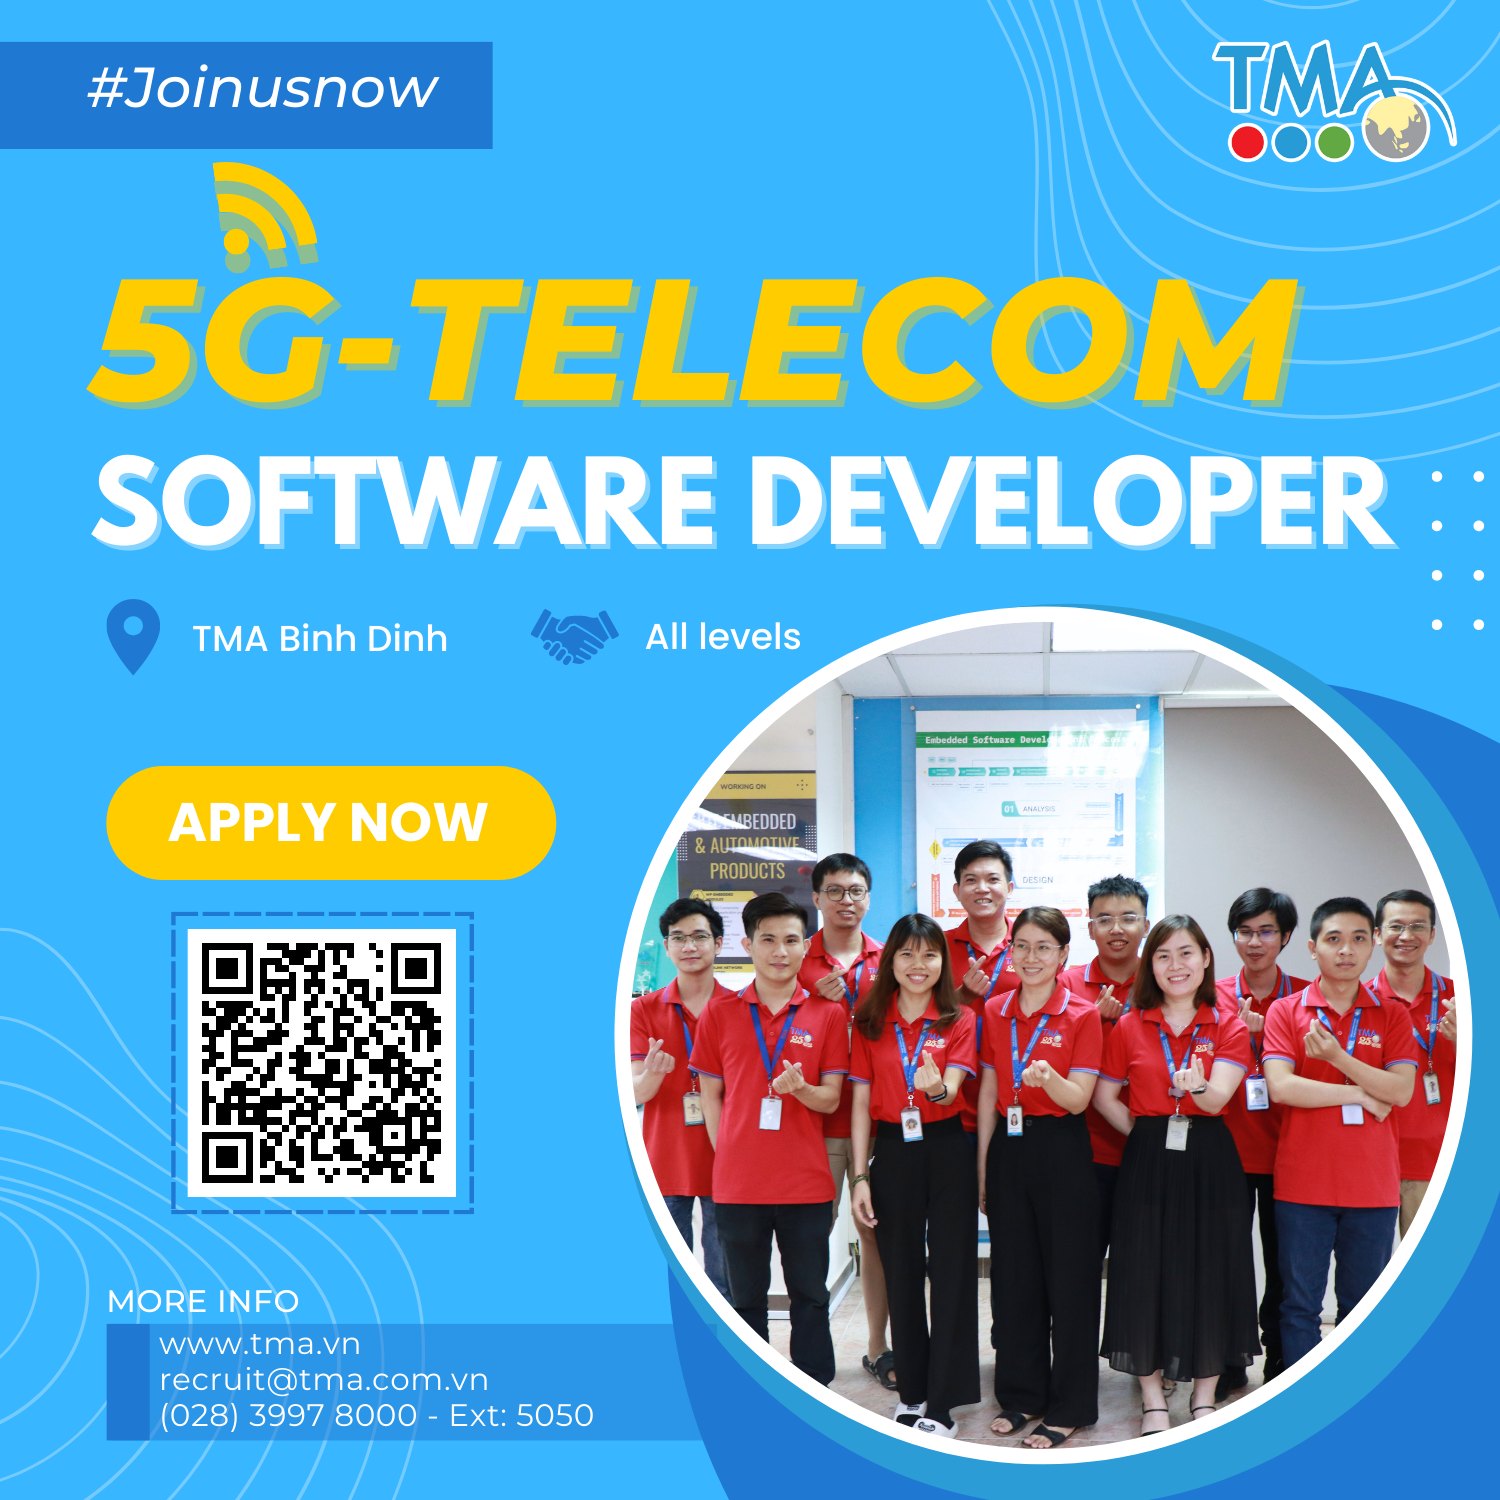 TMA Binh Dinh is looking for 5G-TELECOM Software Developer (All level)